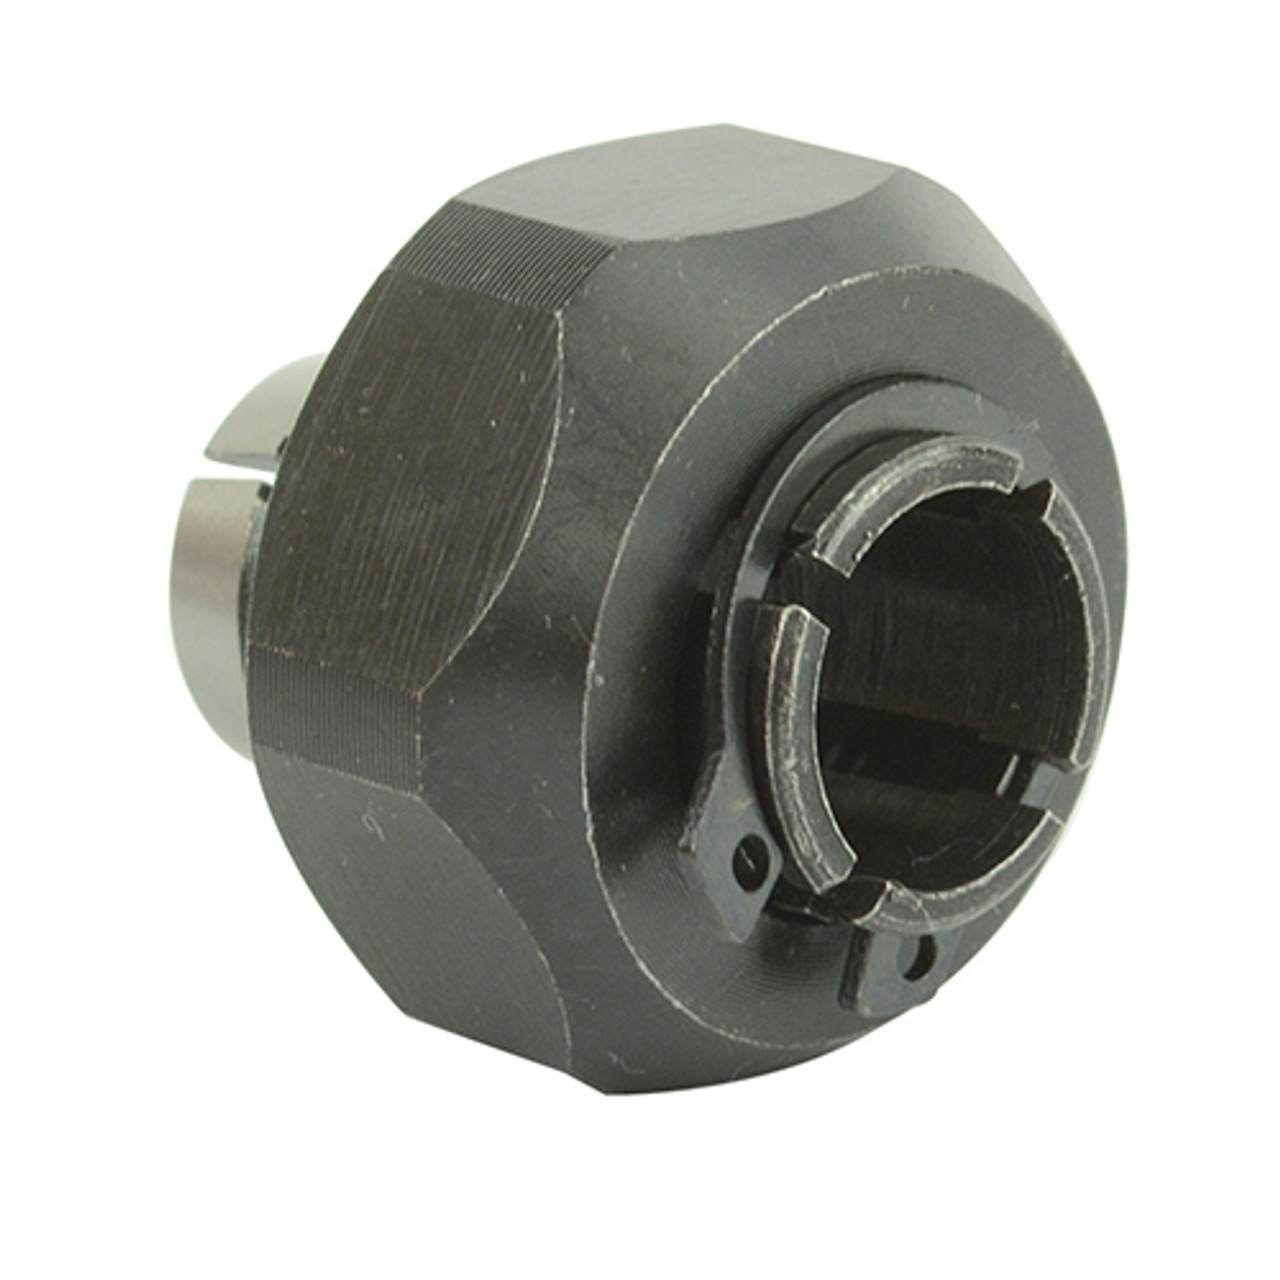 PC 690 Router Collet 1/2"